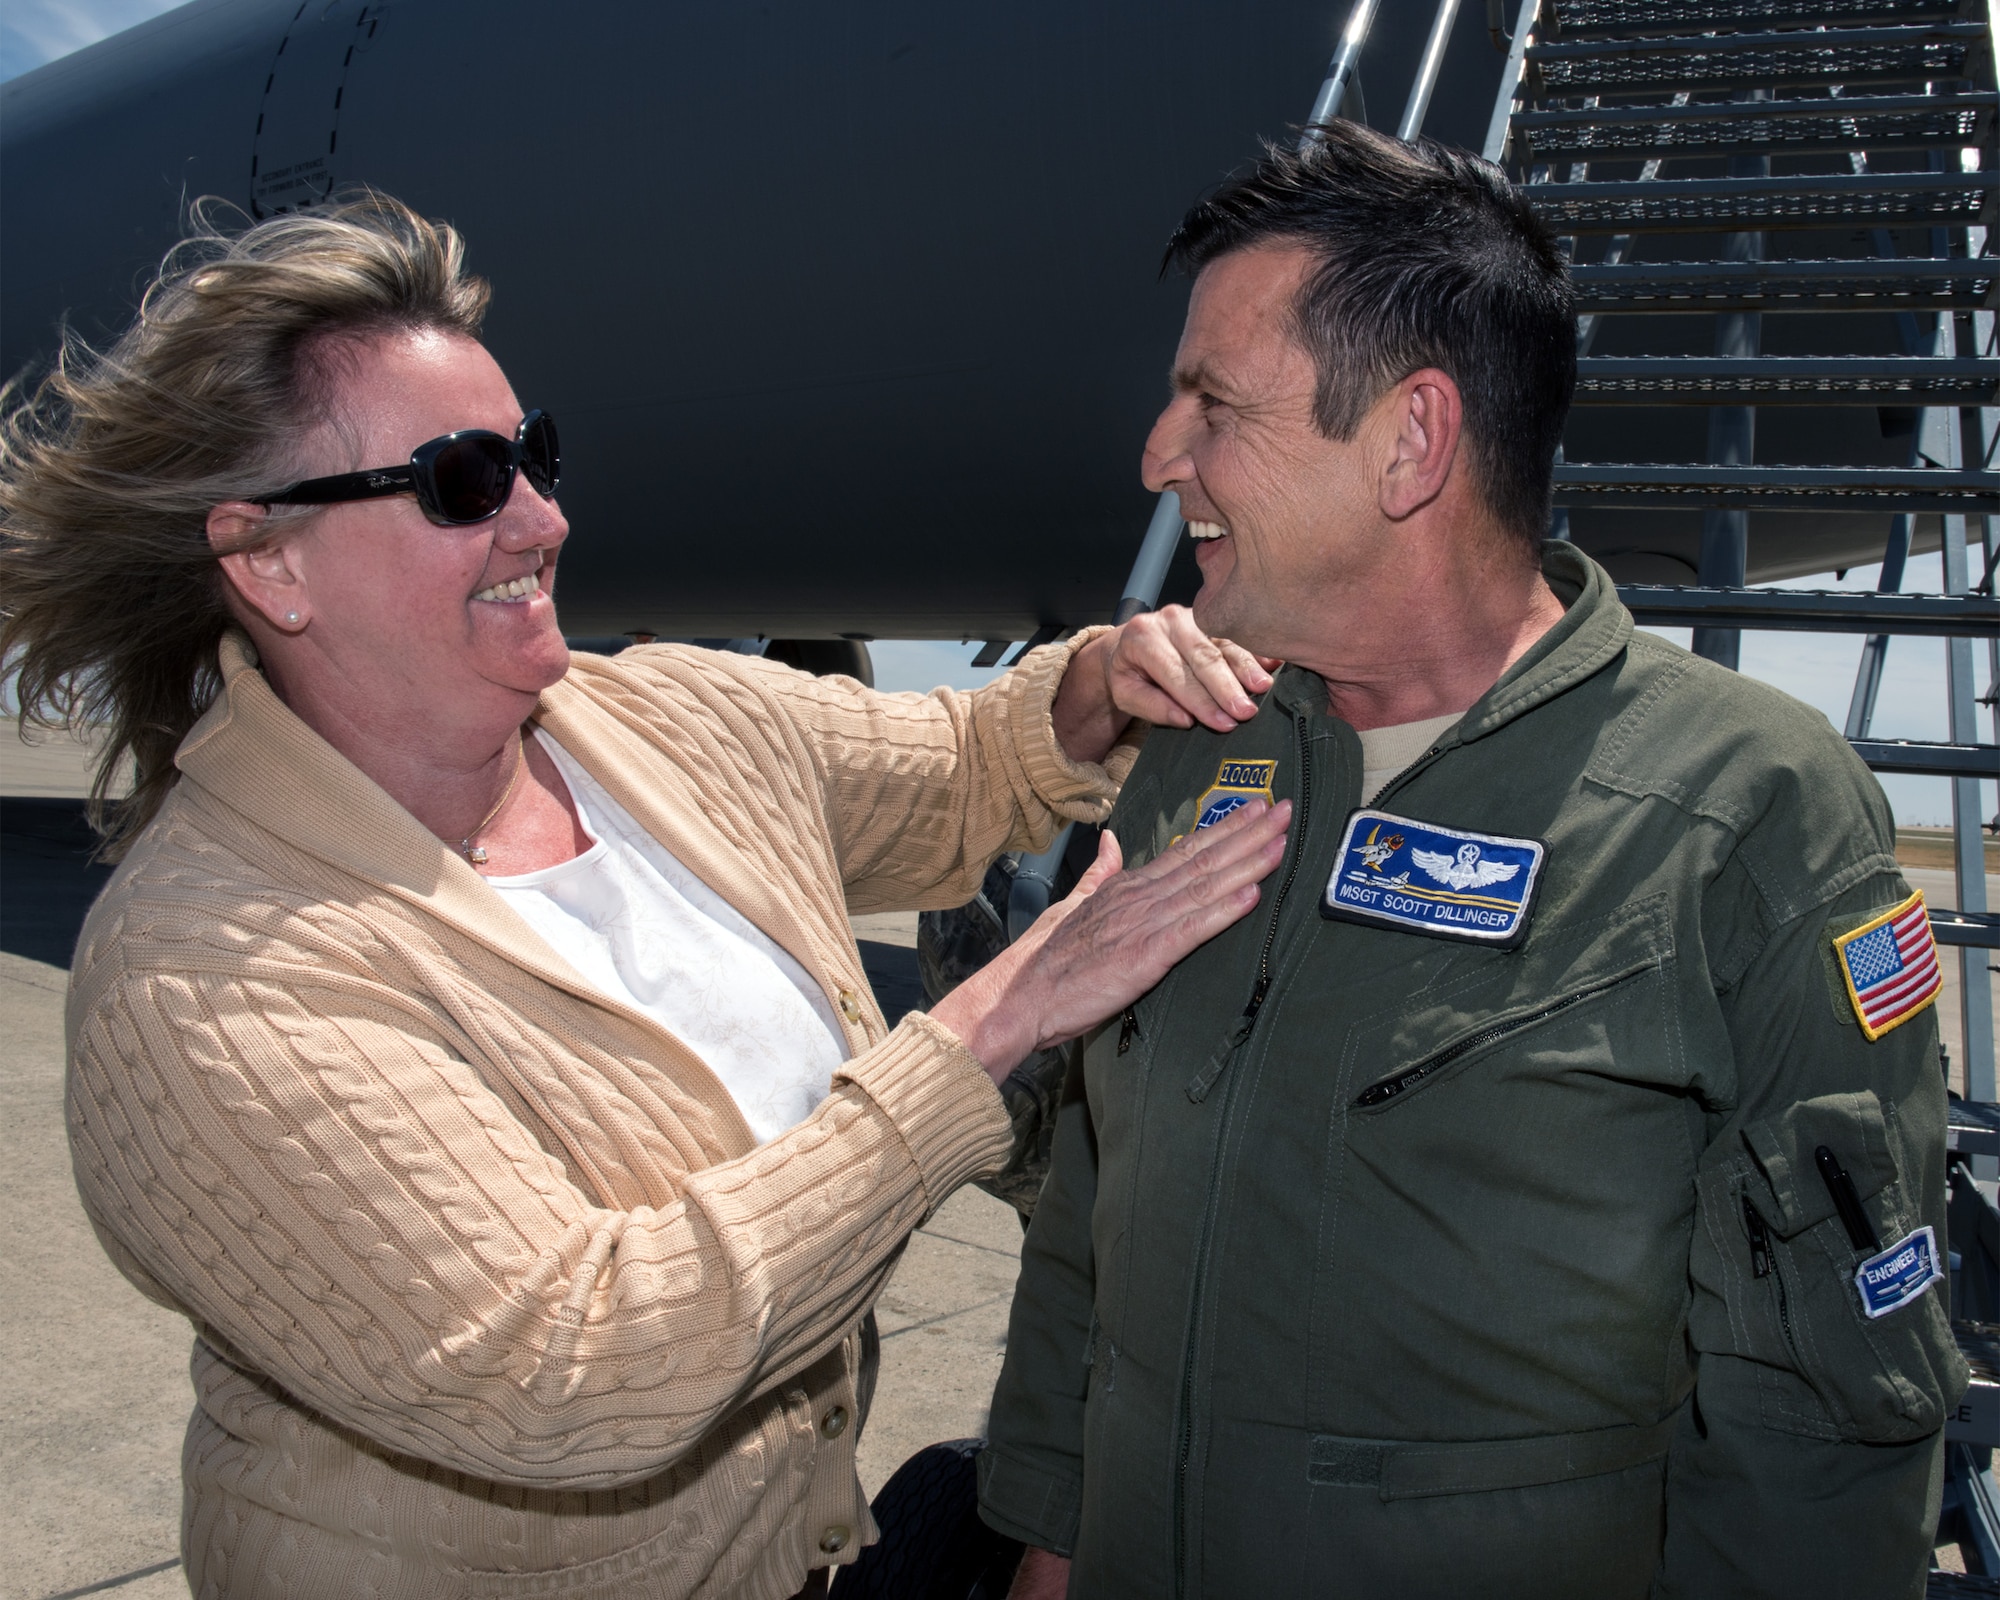 U.S. Air Force Master Sgt. Scott Dillinger, 6th Air Refueling Squadron noncommissioned officer in charge of standardization and evaluation and a KC-10 Extender flight engineer, arrives at Travis Air Force Base, Calif., June 6, 2018. Dillinger eclipsed the 10,000 flight hour mark and was greeted by family, friends and coworkers. (U.S. Air Force photo by Louis Briscese)